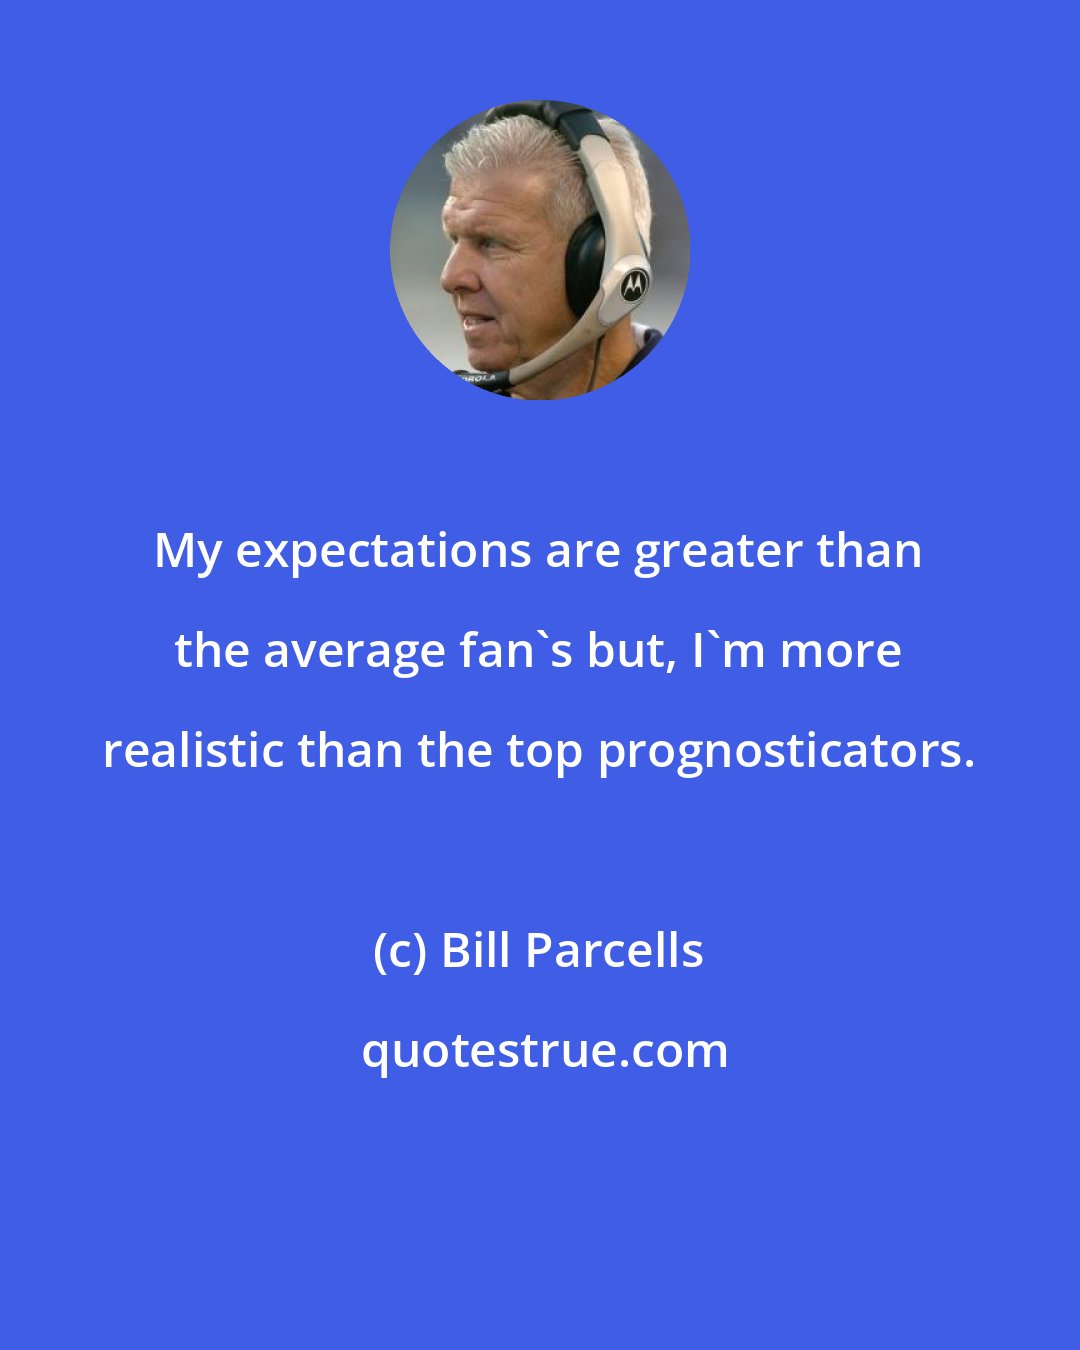 Bill Parcells: My expectations are greater than the average fan's but, I'm more realistic than the top prognosticators.